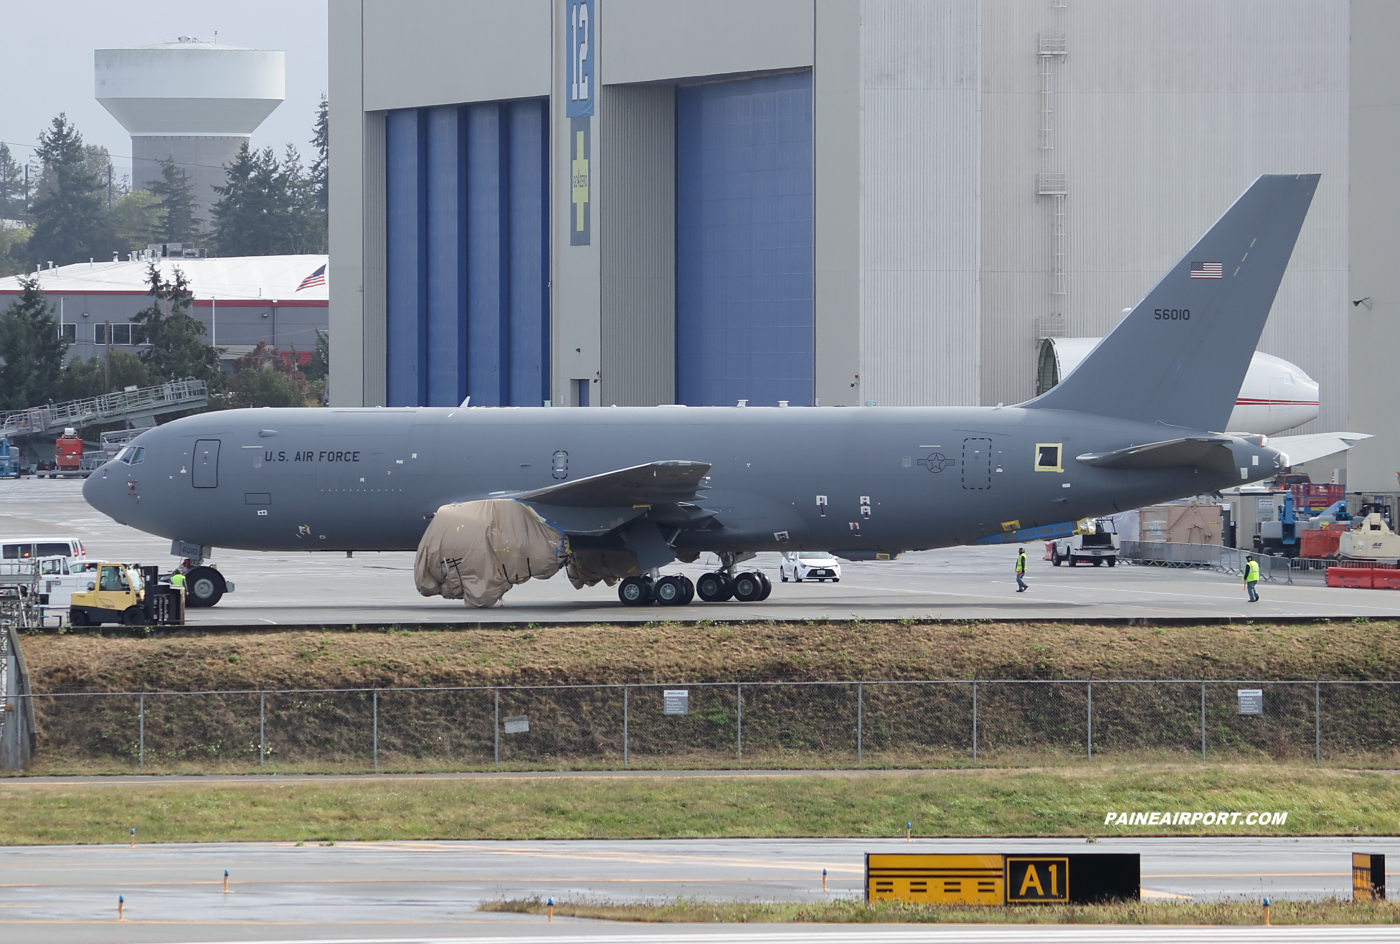 KC-46A 15-46010 at KPAE Paine Field